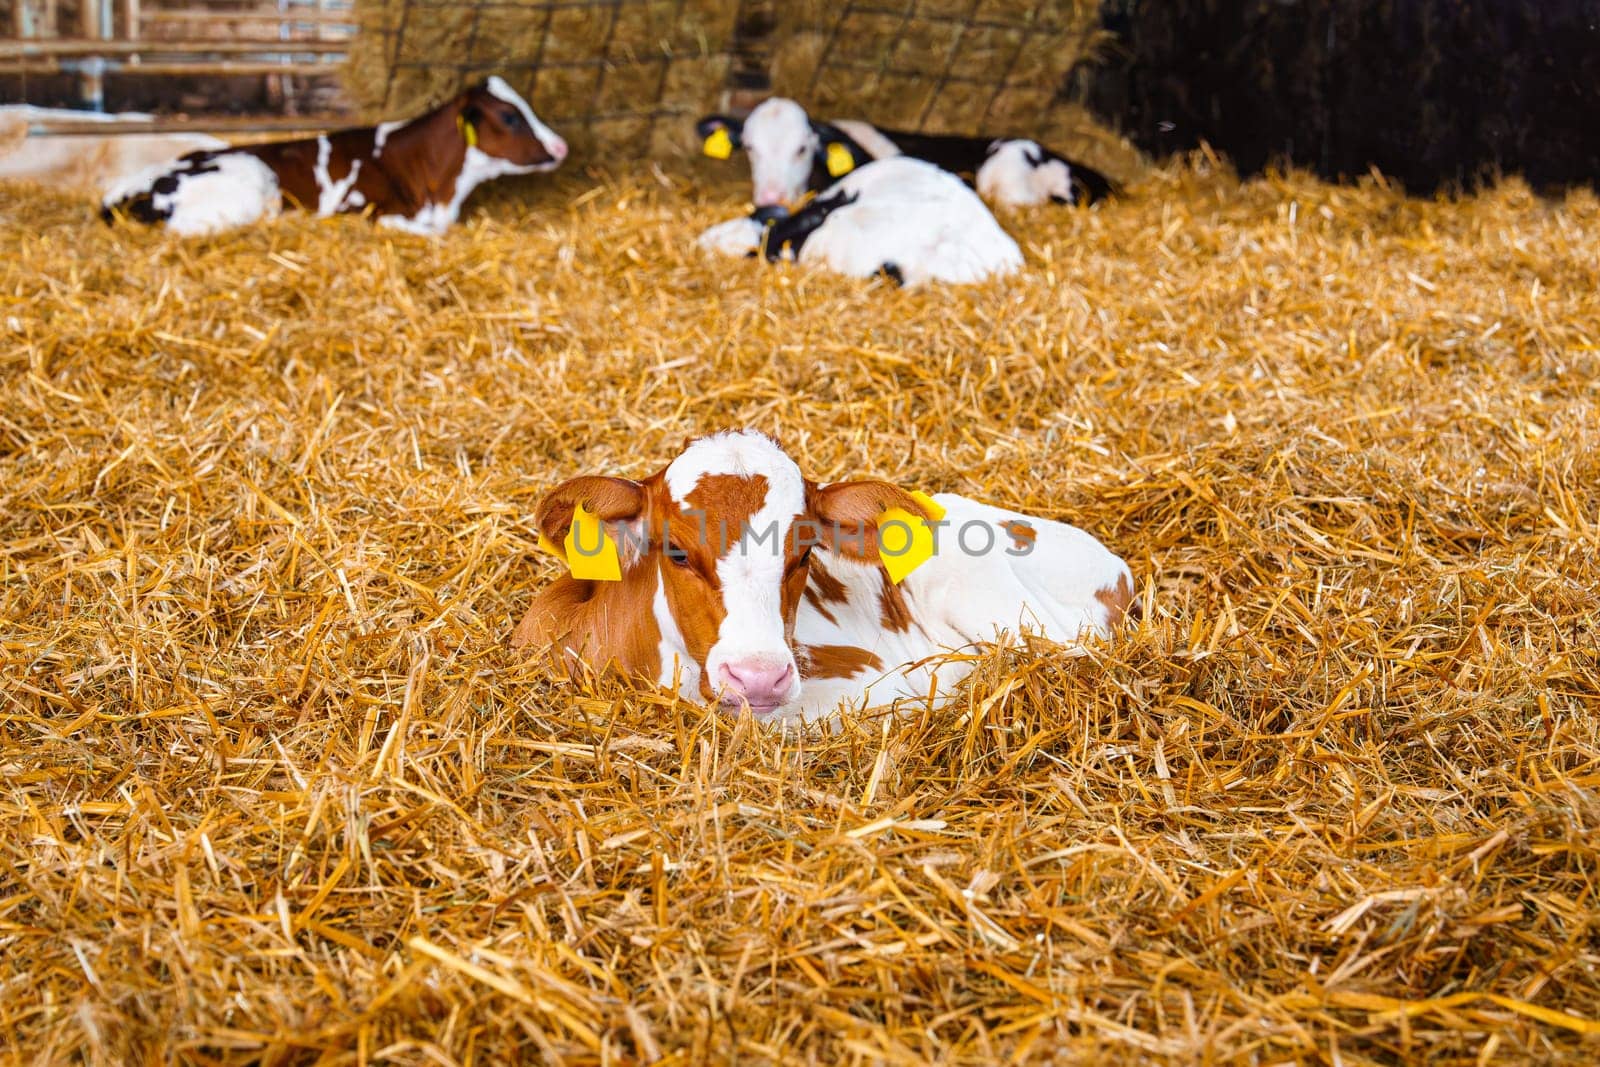 A serene scene capturing a young white and orange baby cow peacefully resting on a clean bed of hay in a barn, conveying a sense of calm and tranquility.